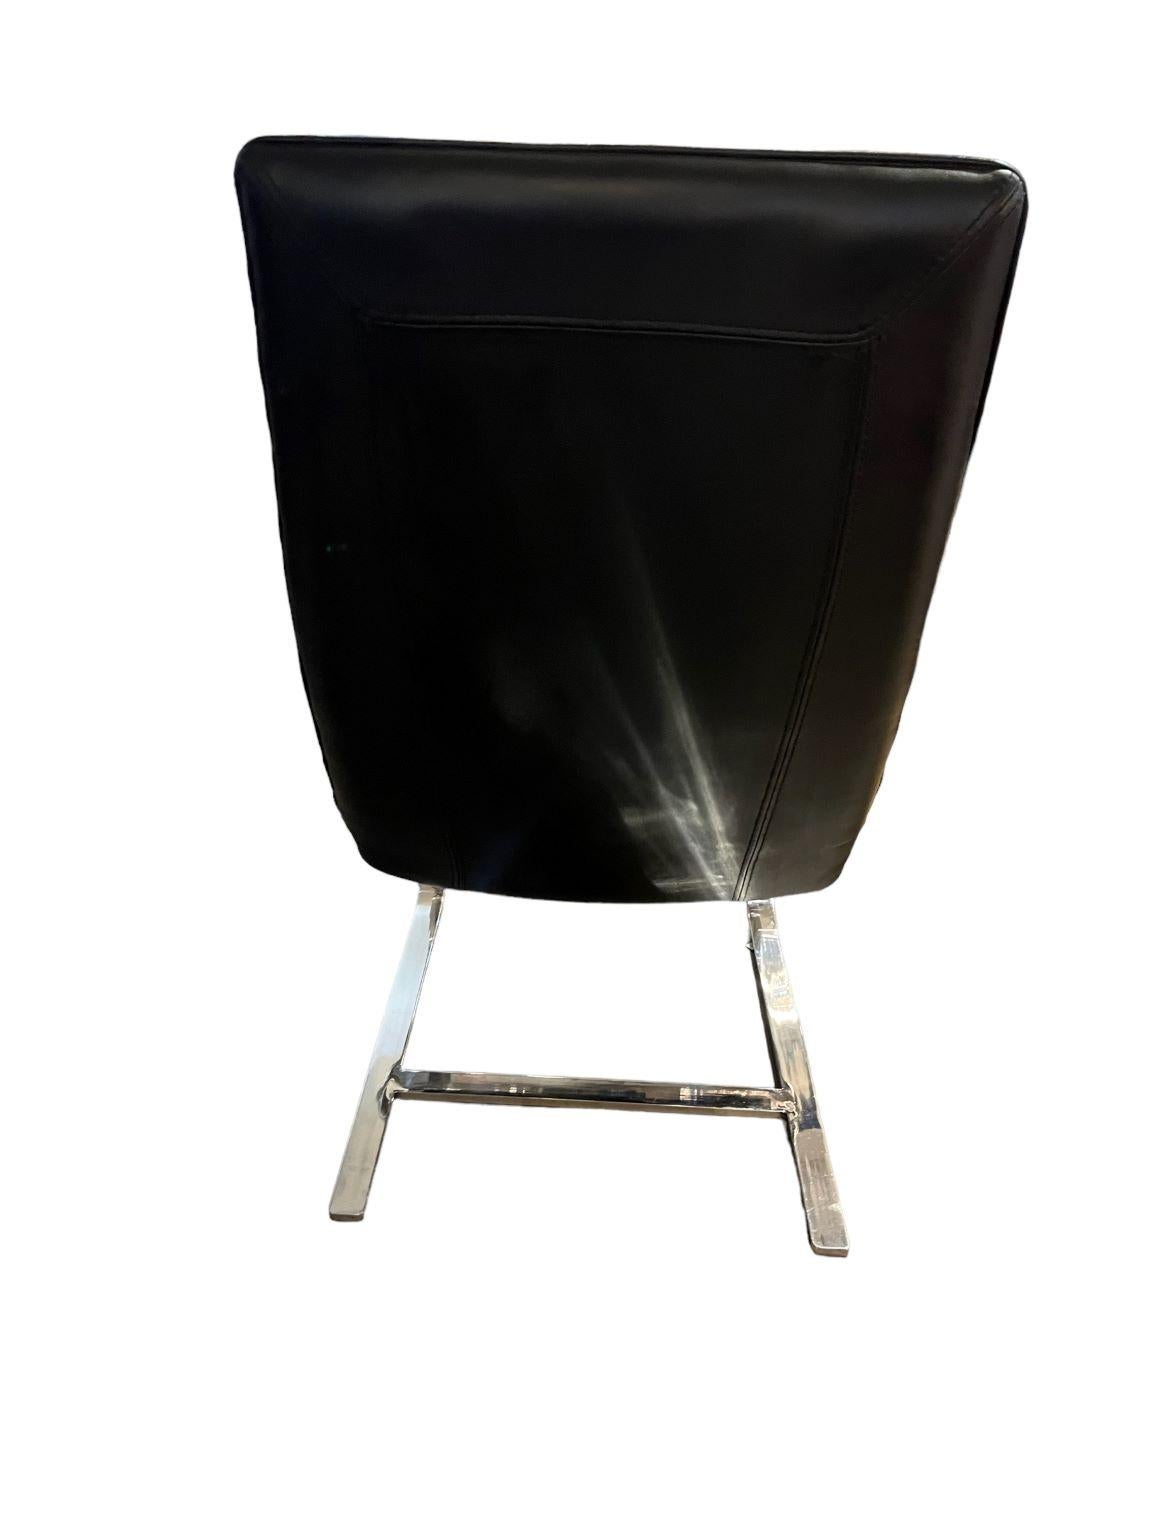 Chrome And Black Leather Modernist Chair In The Style Of Poul Kjaerholm 1